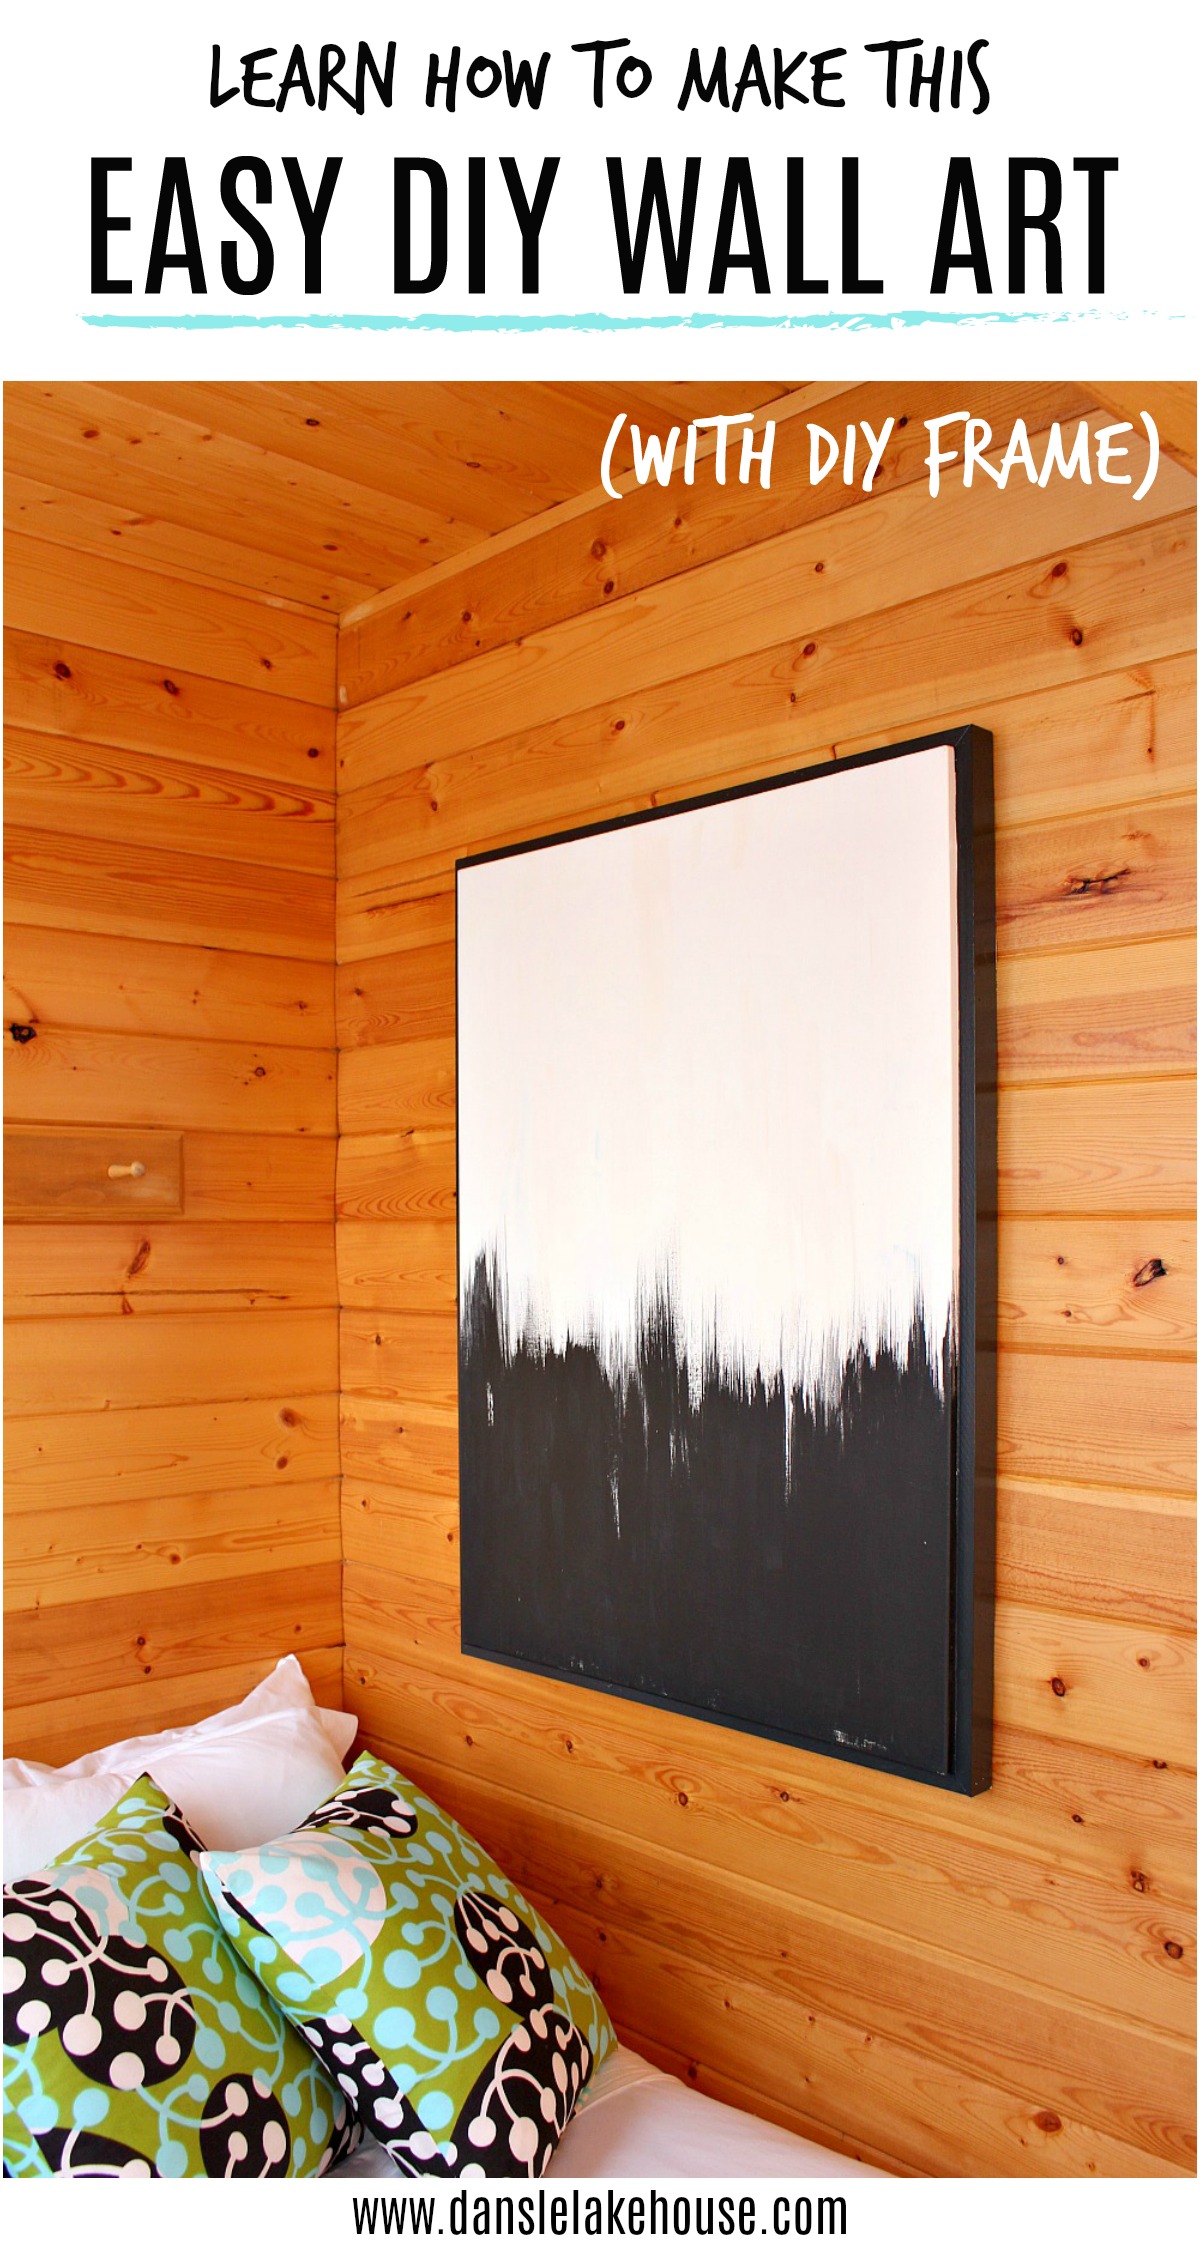 learn how to make this EASY DIY WALL ART